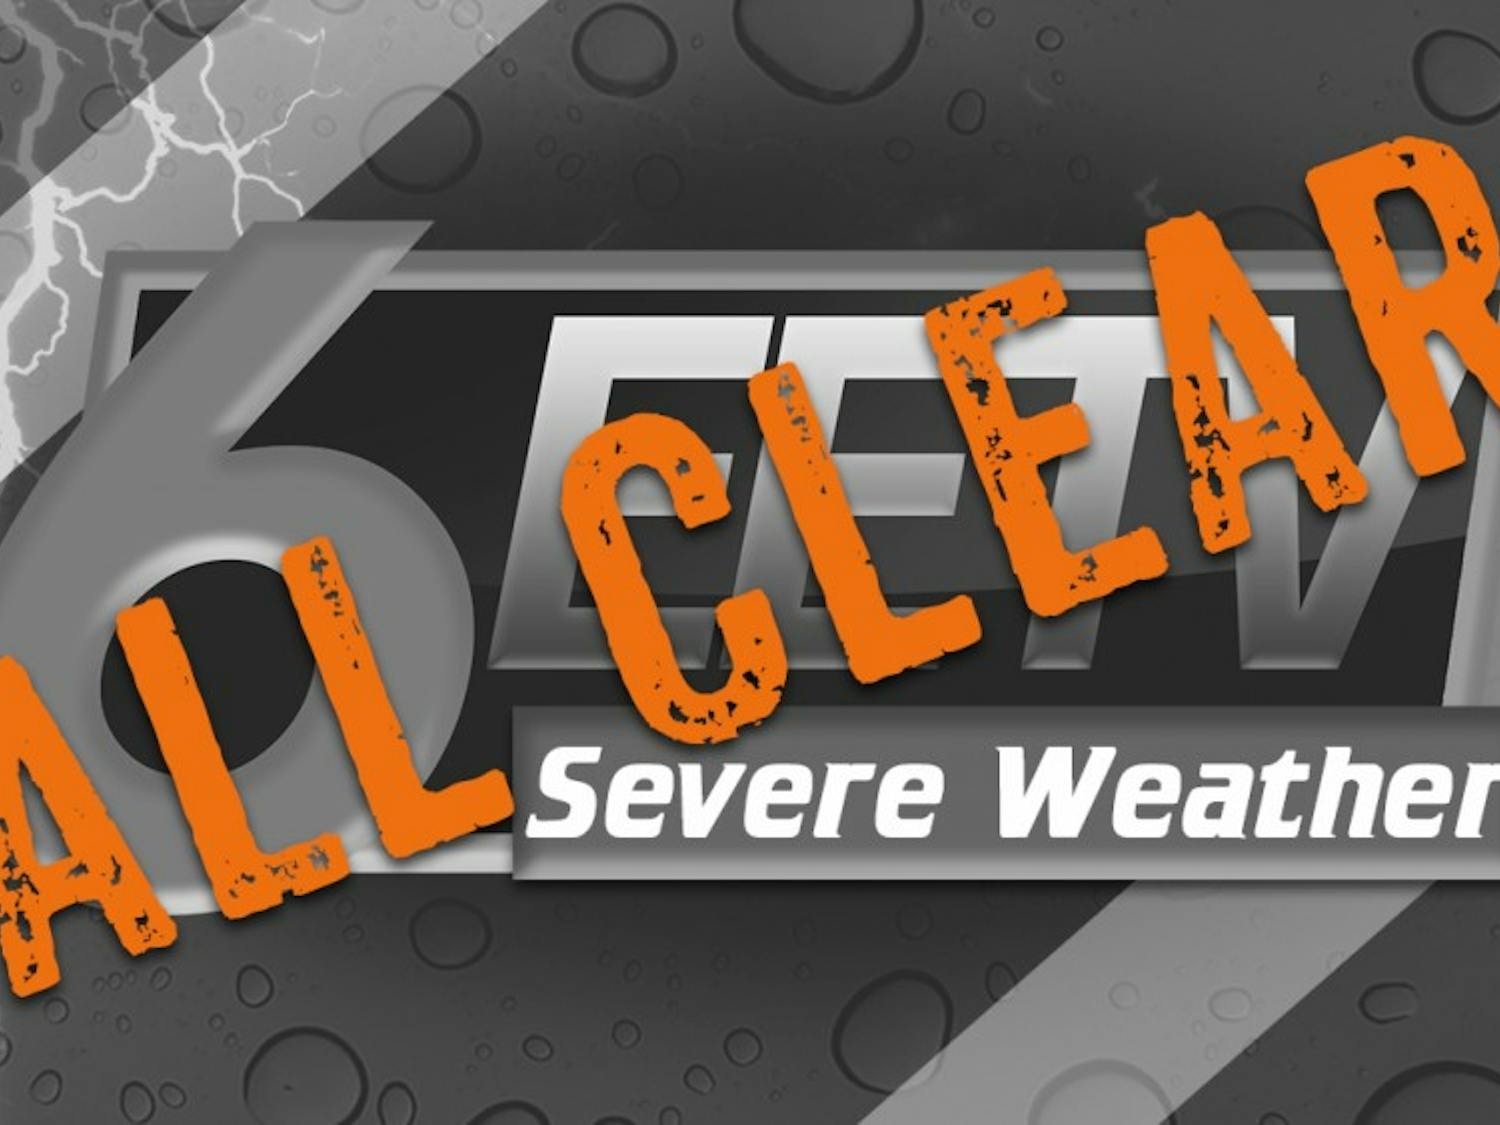 All Clear for severe weather in Lee County. Via EETV.